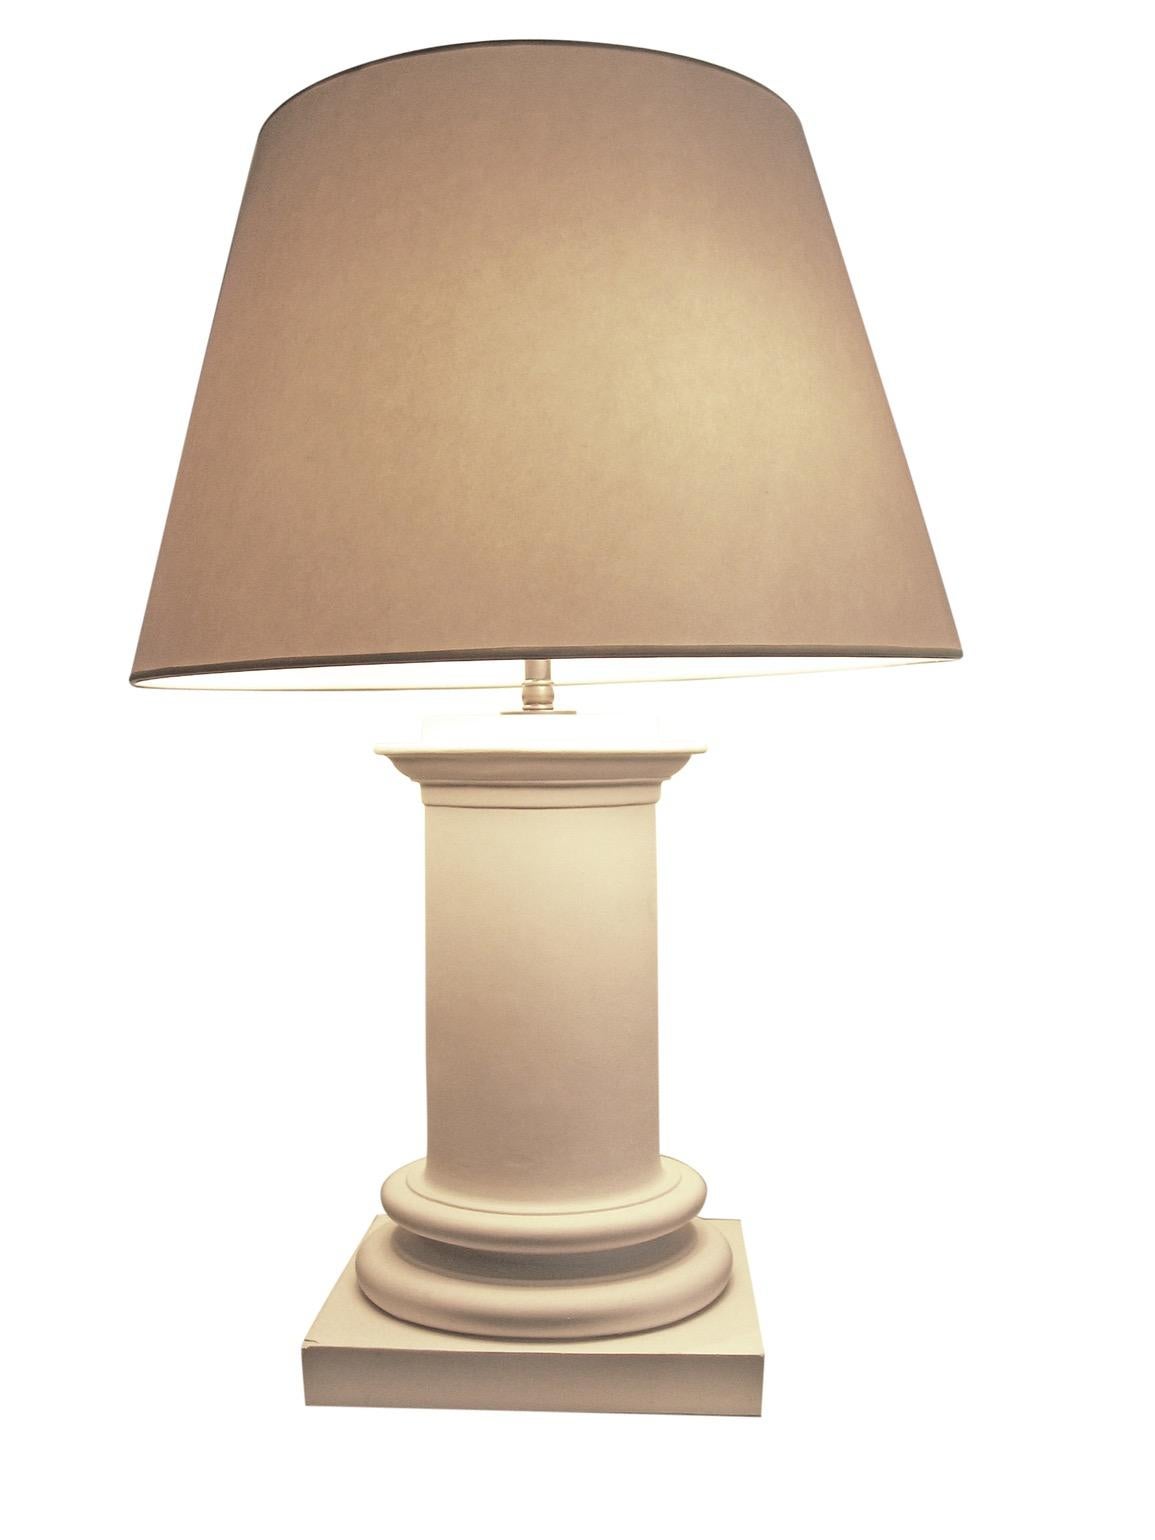 Table lamp made of white plaster with aged brass hardware. The Grove lamp includes a single socket, with dimmer switch.

Dimensions: 7.5